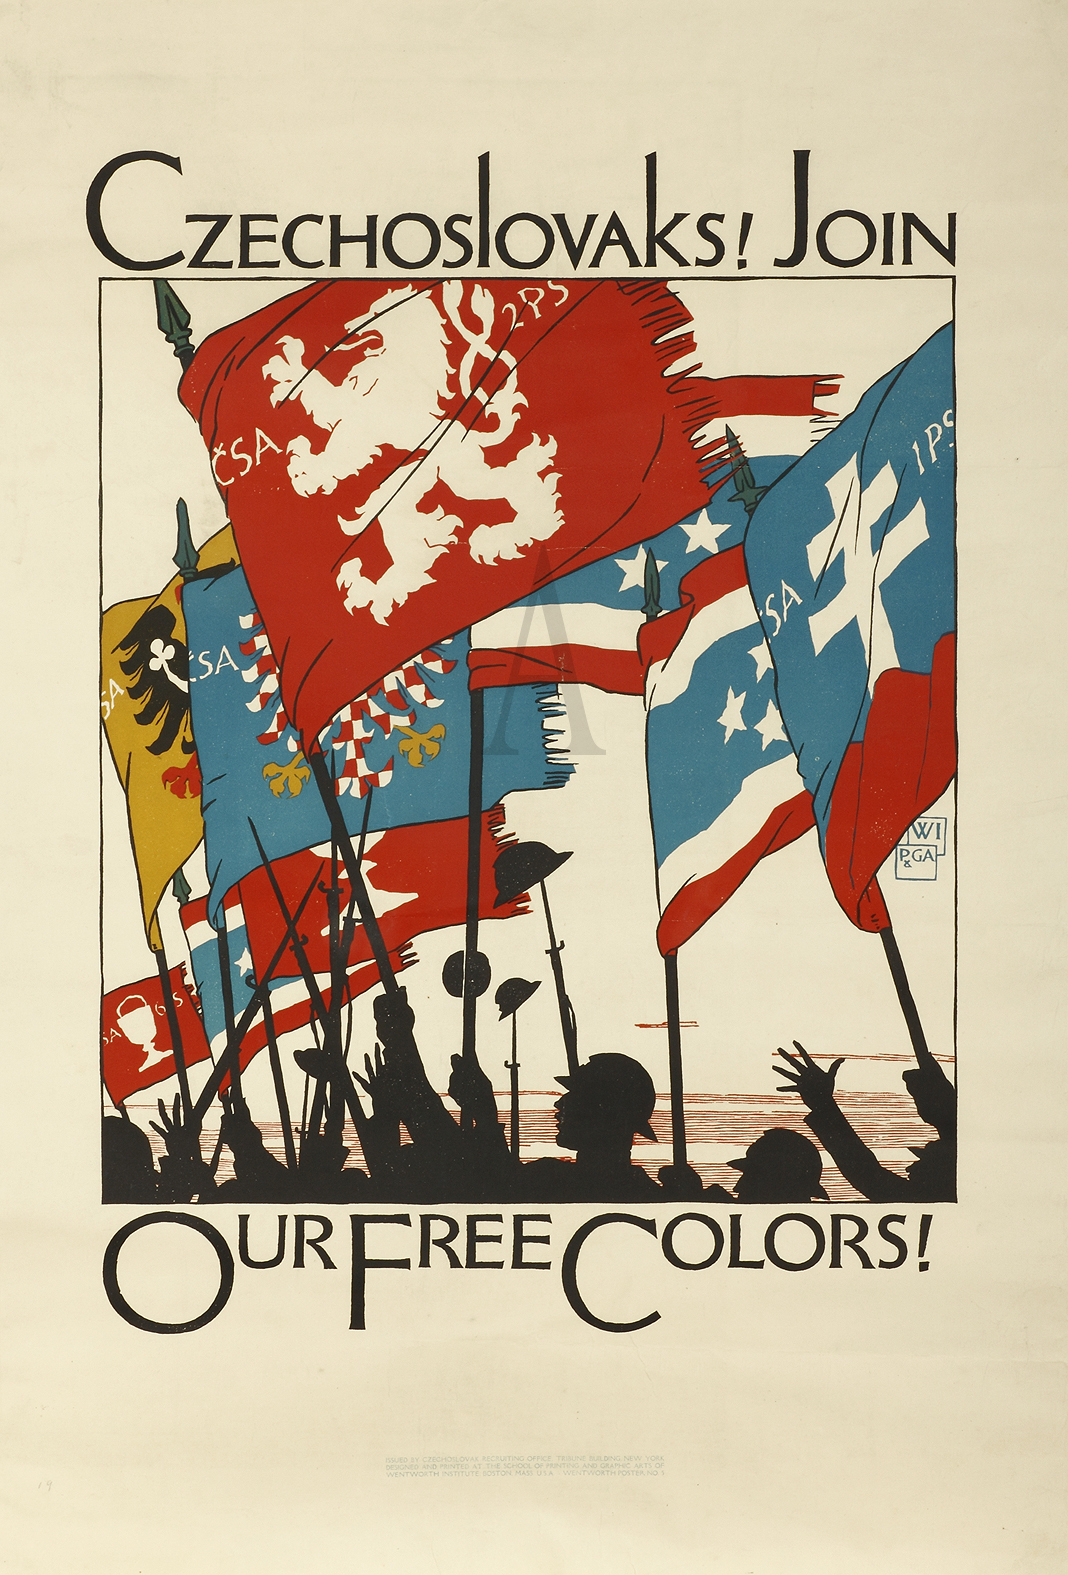 Czechoslovaks! Join Our Free Colours! - Vintage Print from 1950